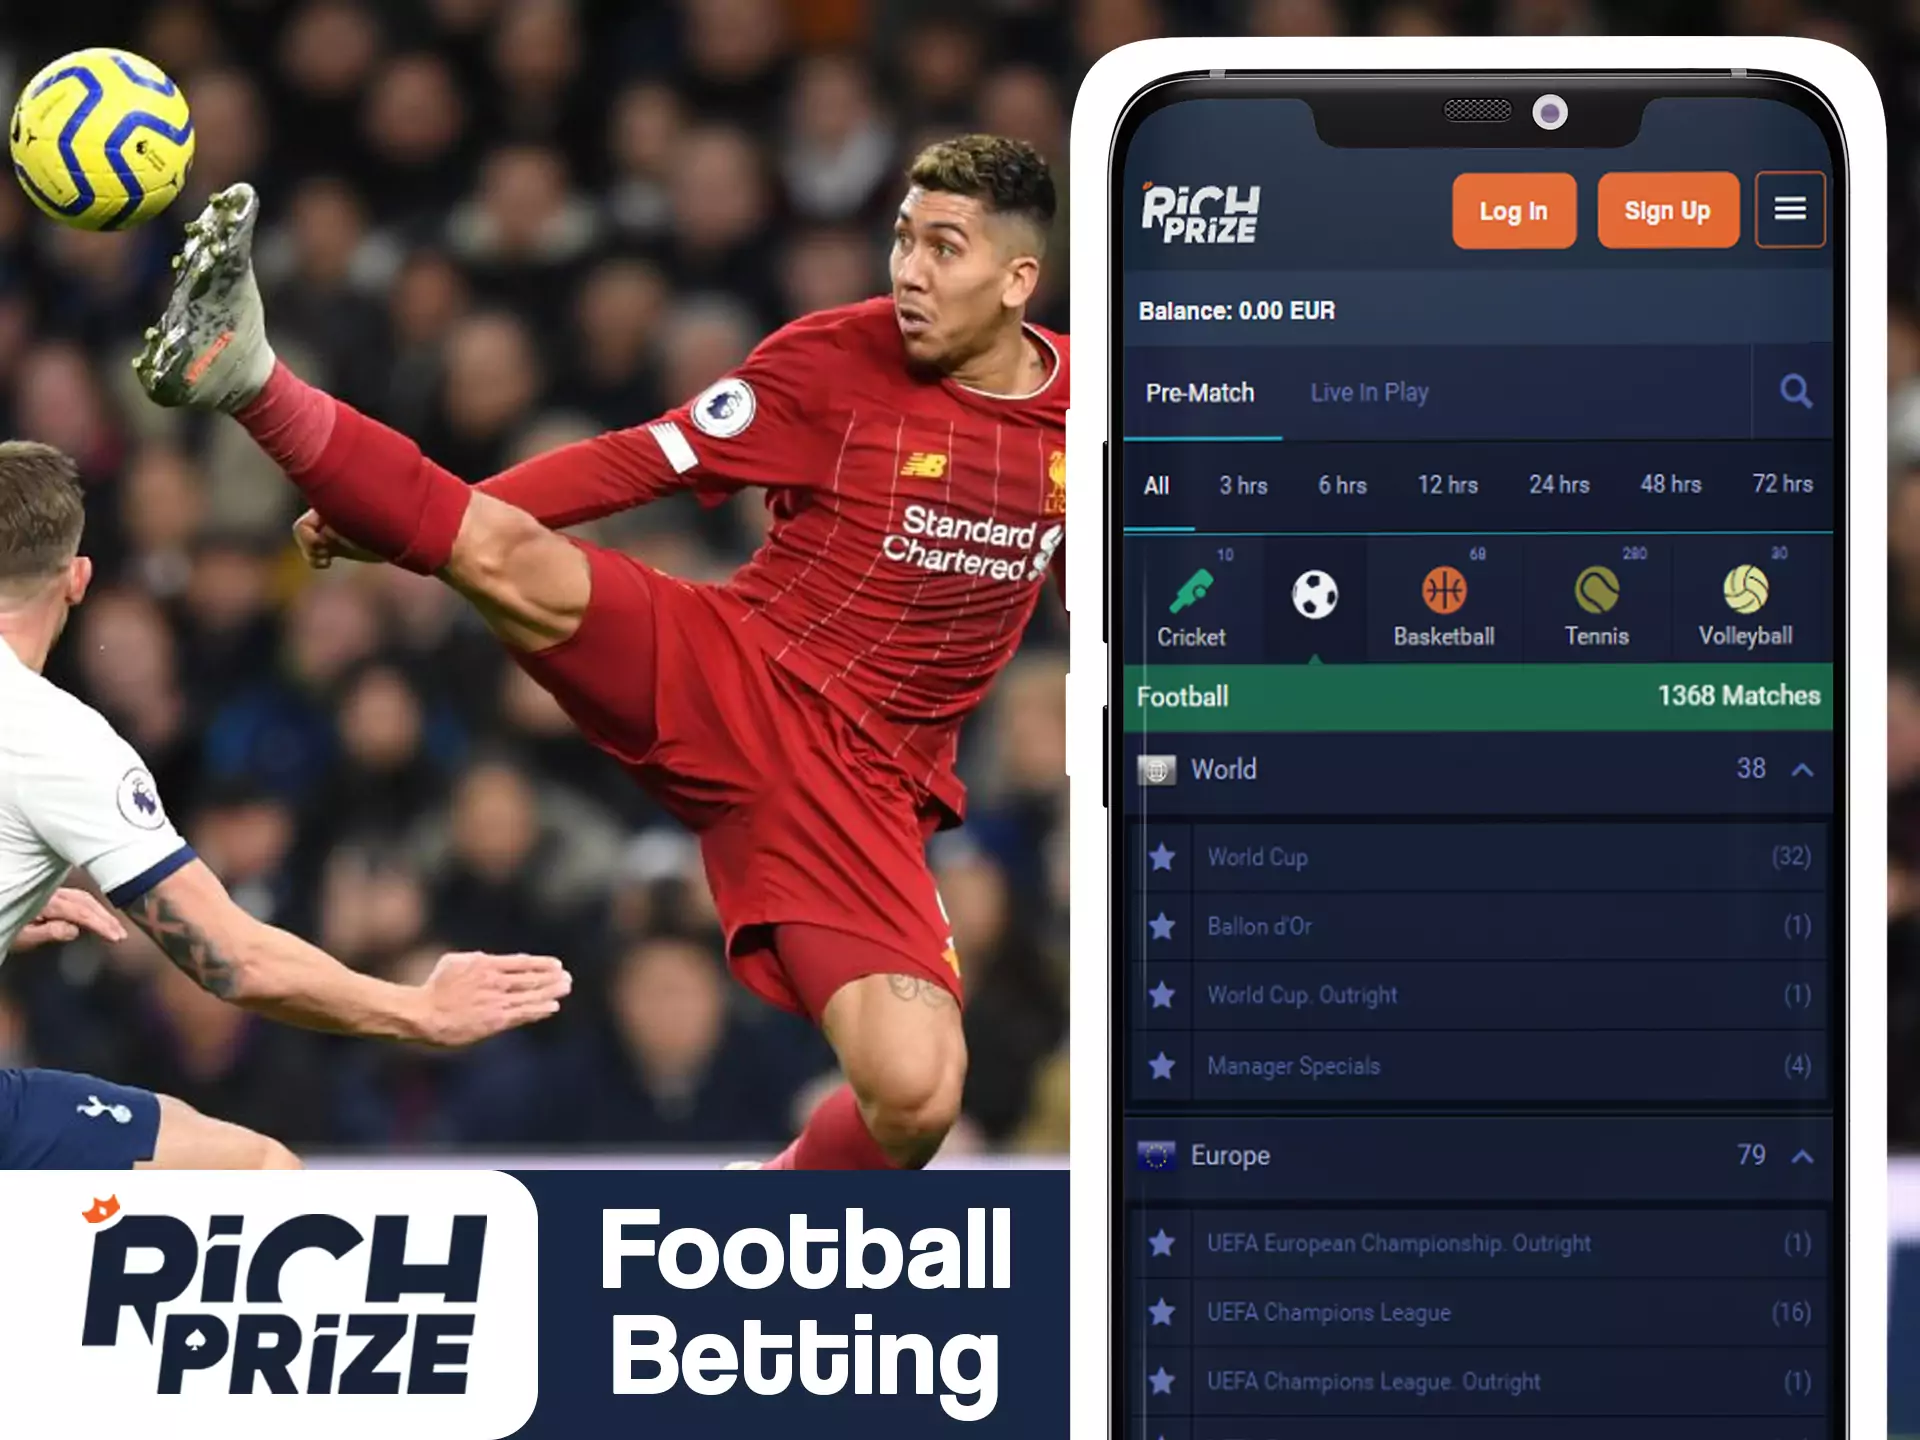 Bet on greatest football games using RichPrize app.